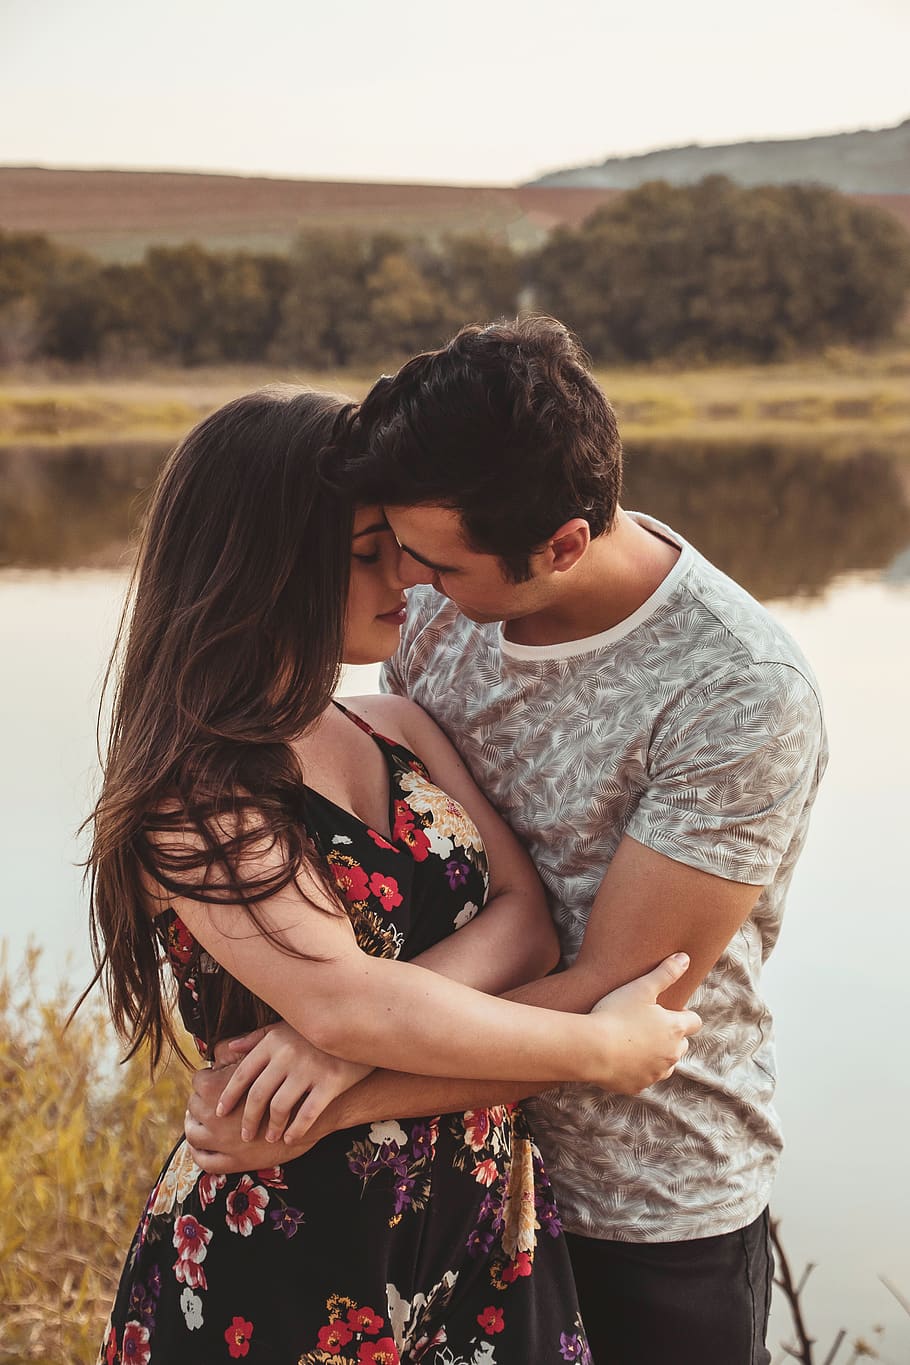 Man and Woman Facing Each Other While Hugging Near River, beauty